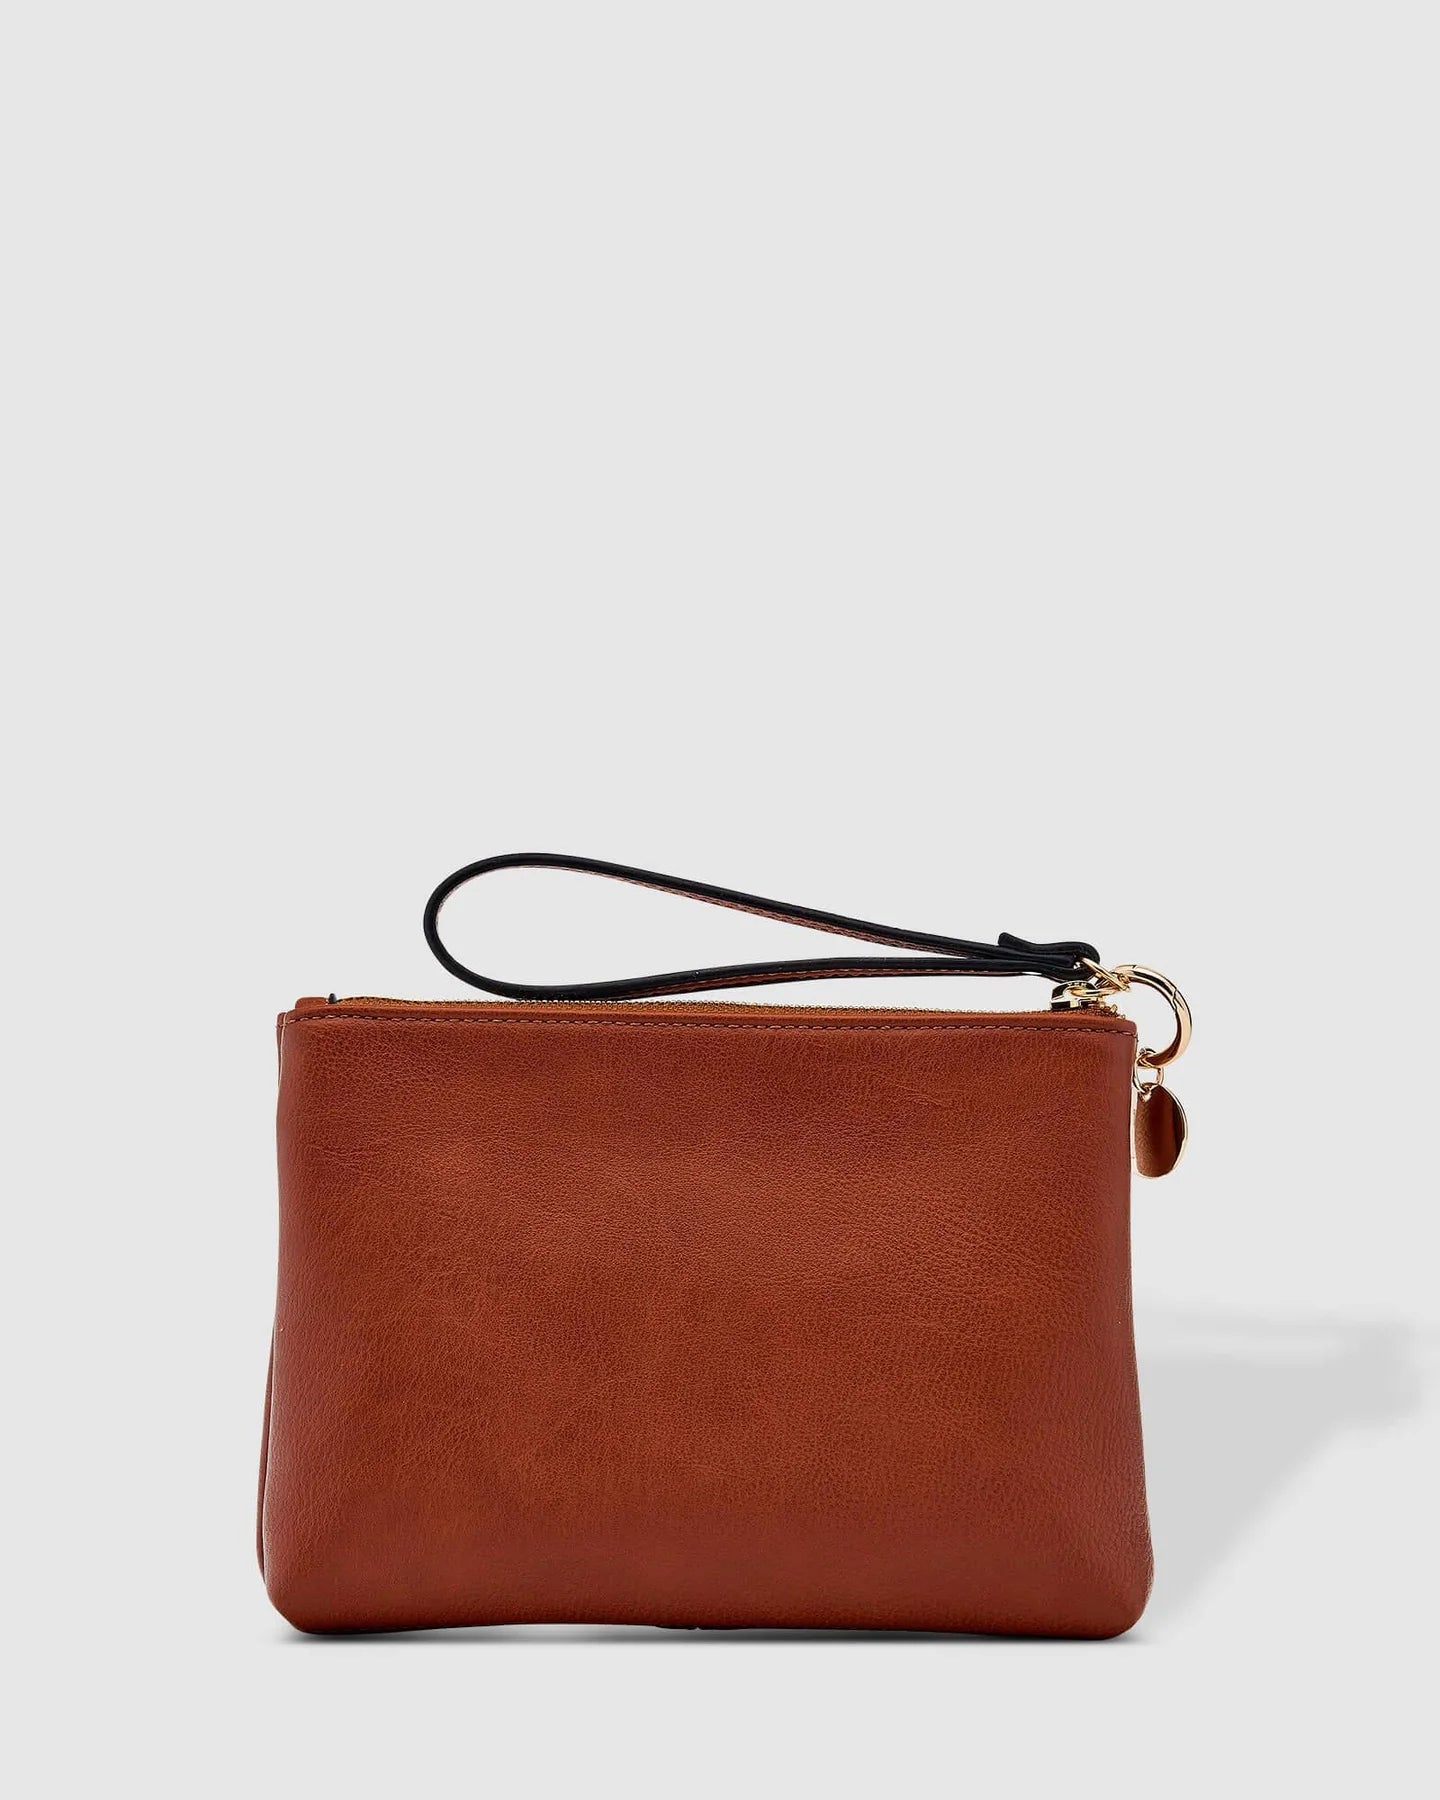 Baby Gracie Clutch (Tan) - Something For Me​​